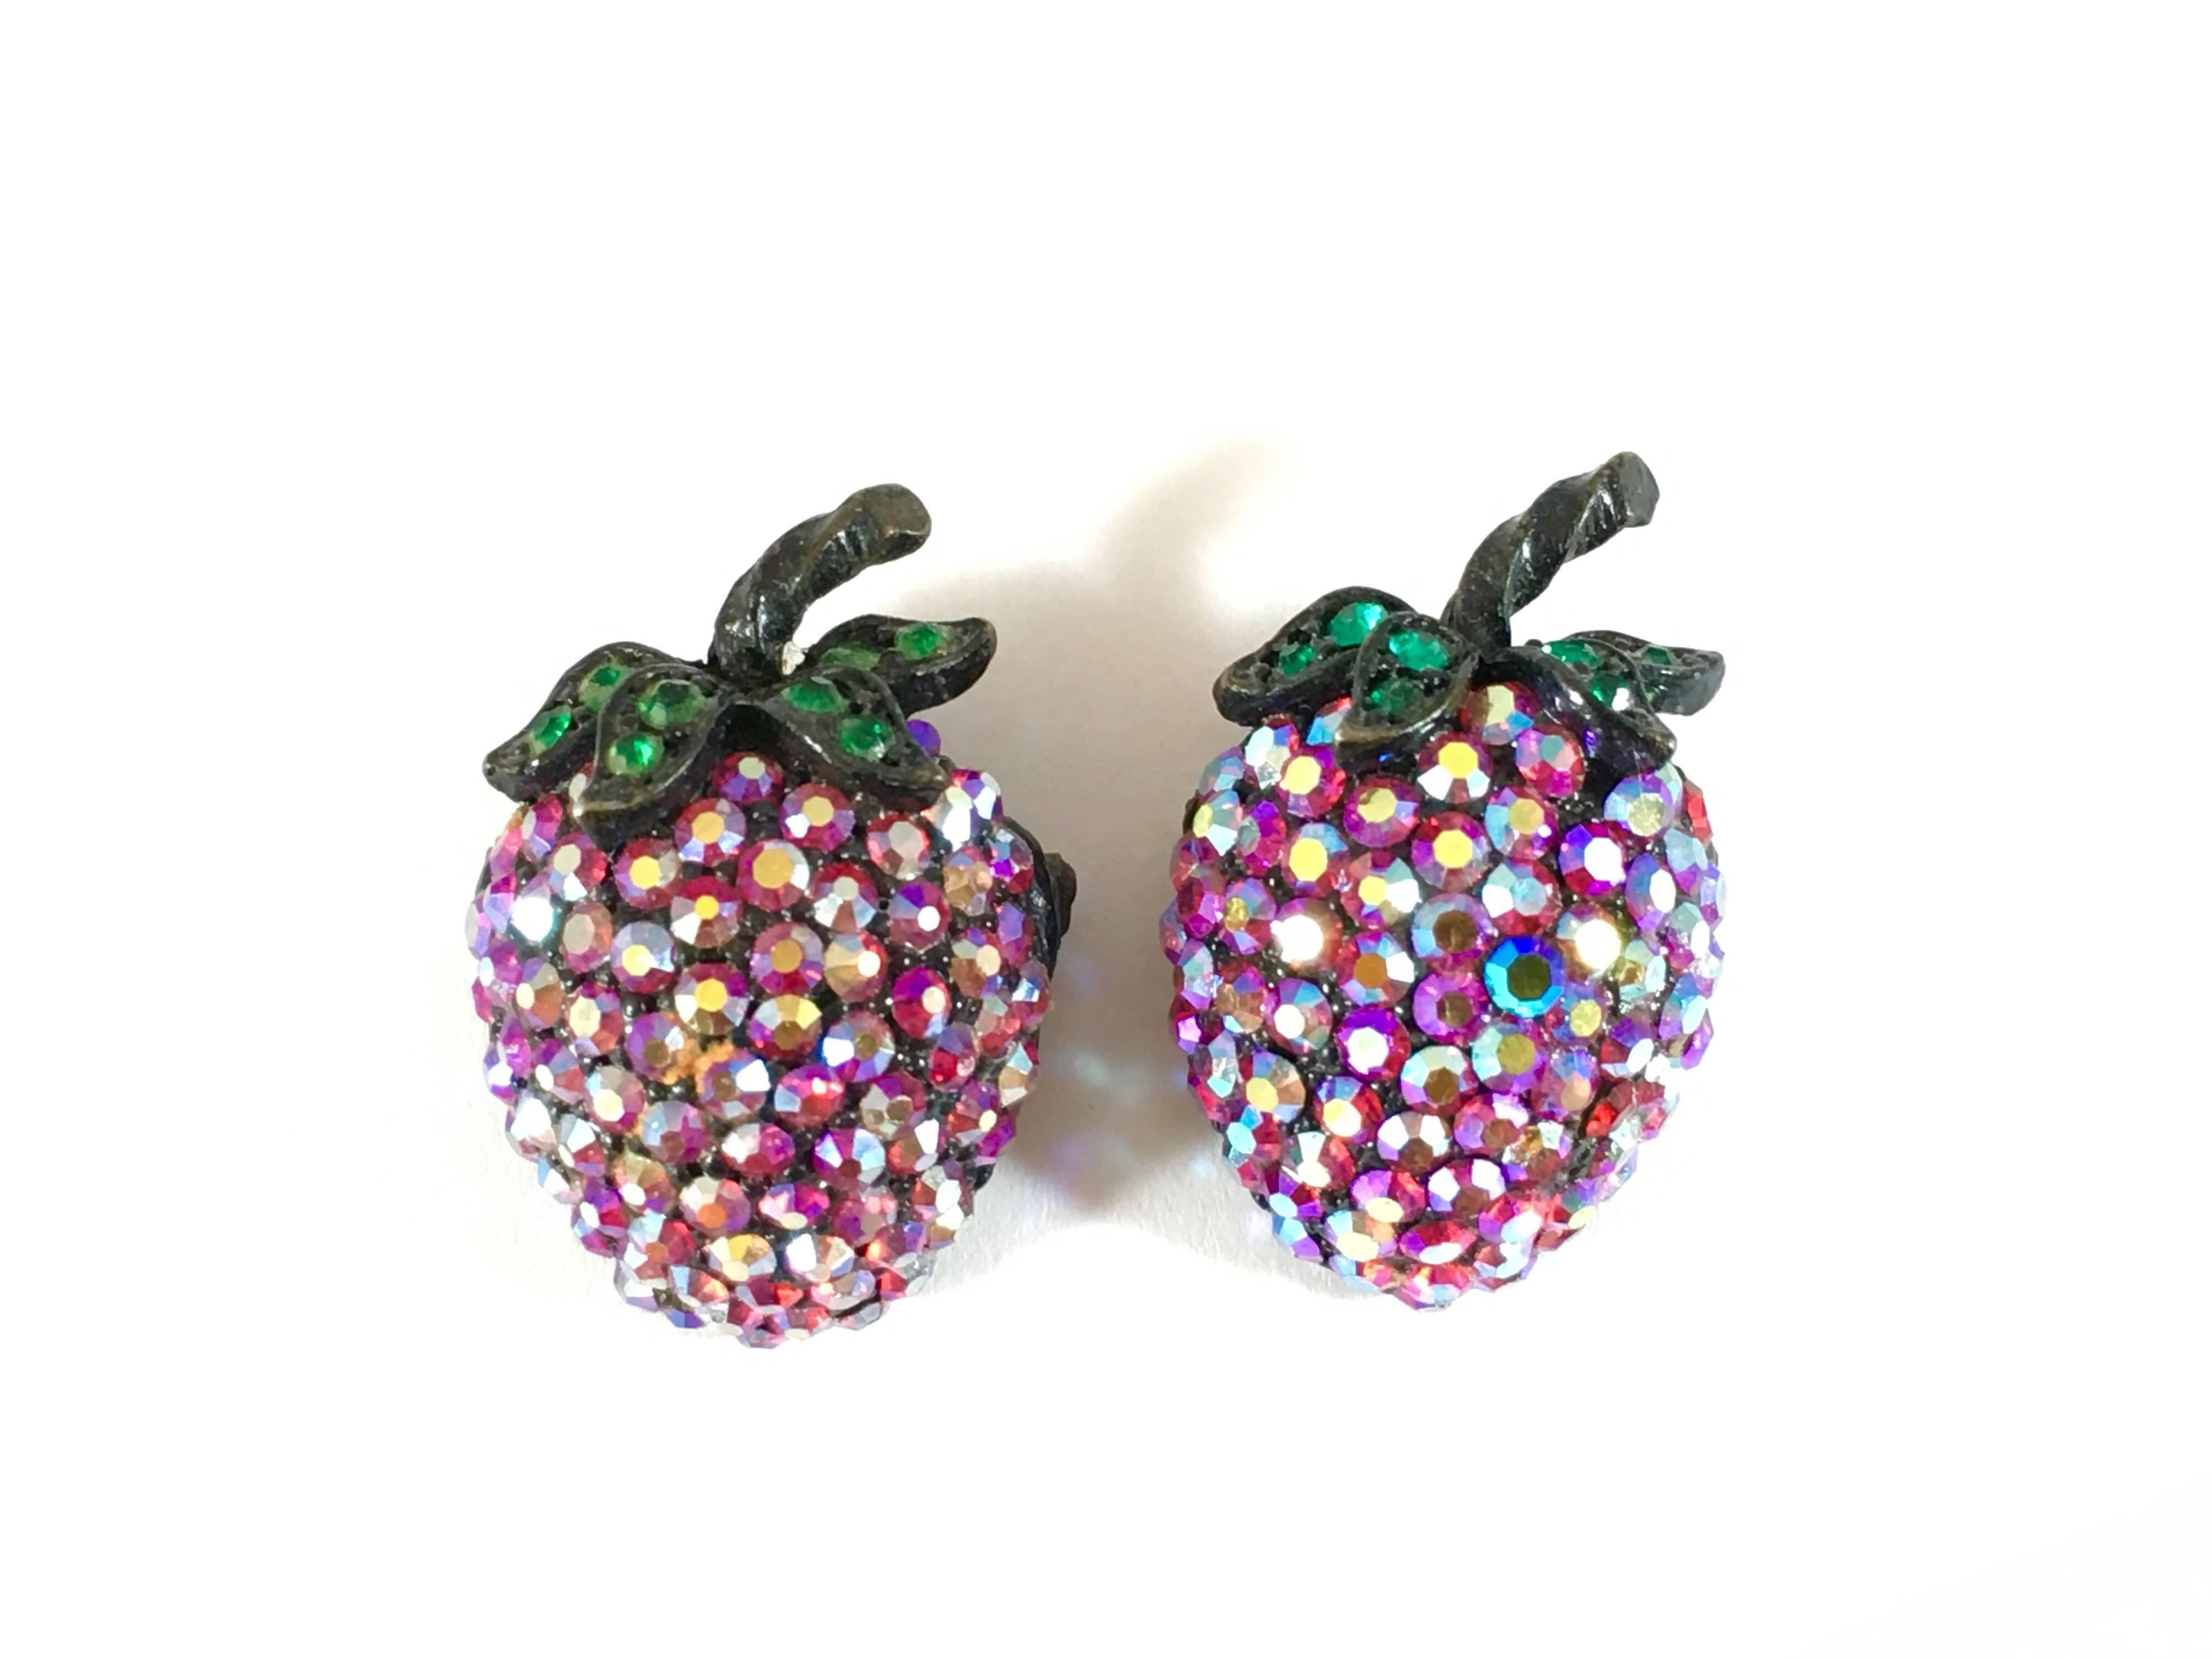 These adorable twin strawberry brooches are from the 1950s. They are made up of red crystal rhinestones in a black enamel 'japanned' setting. They are both signed 'Weiss' on the back. Excellent condition. They are 1 1/8 inches long x 3/4 inches wide.